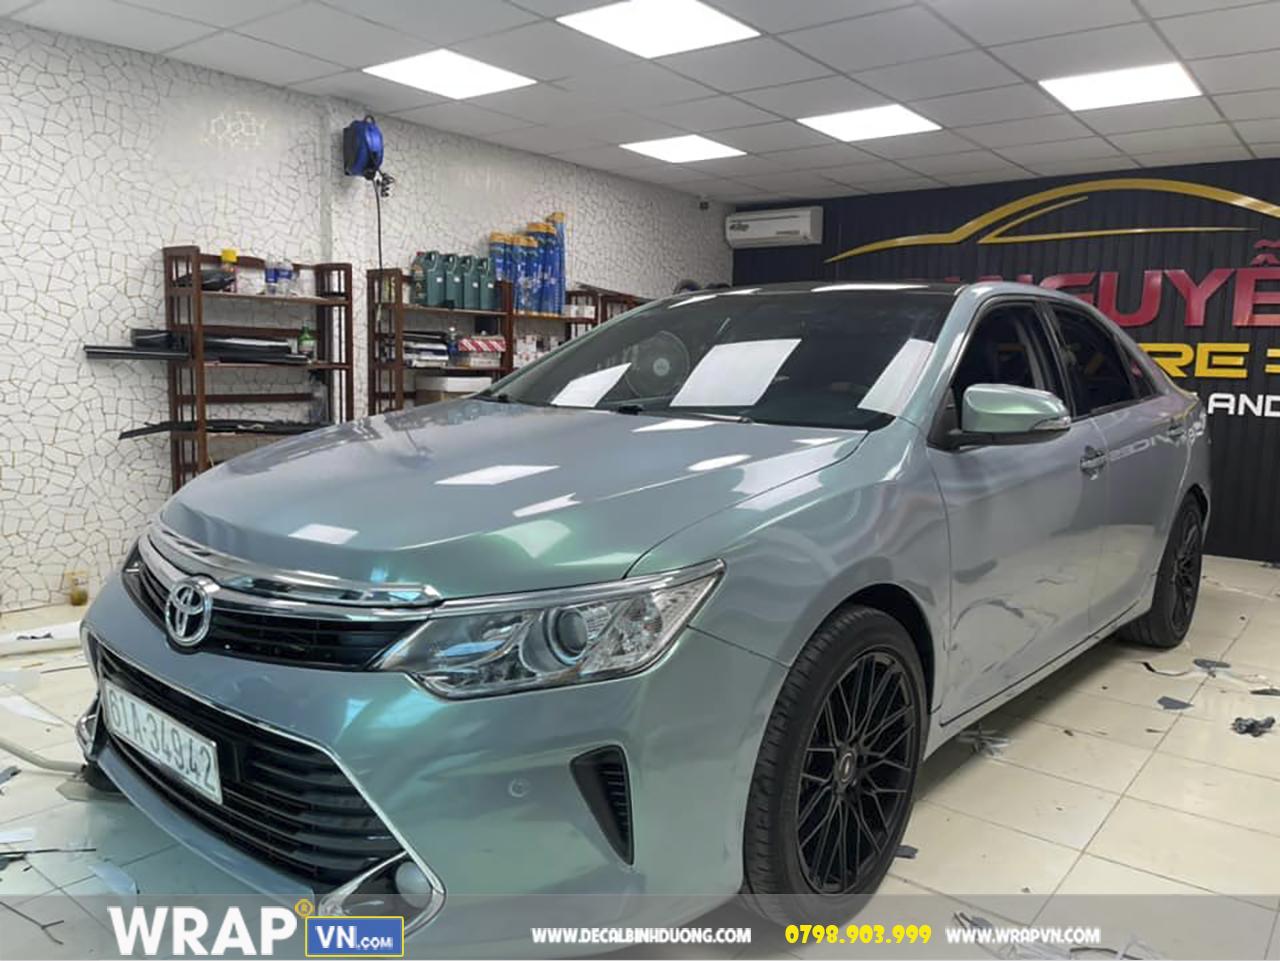 camry-wrap-full-anh-xanh-tim-cao-cap